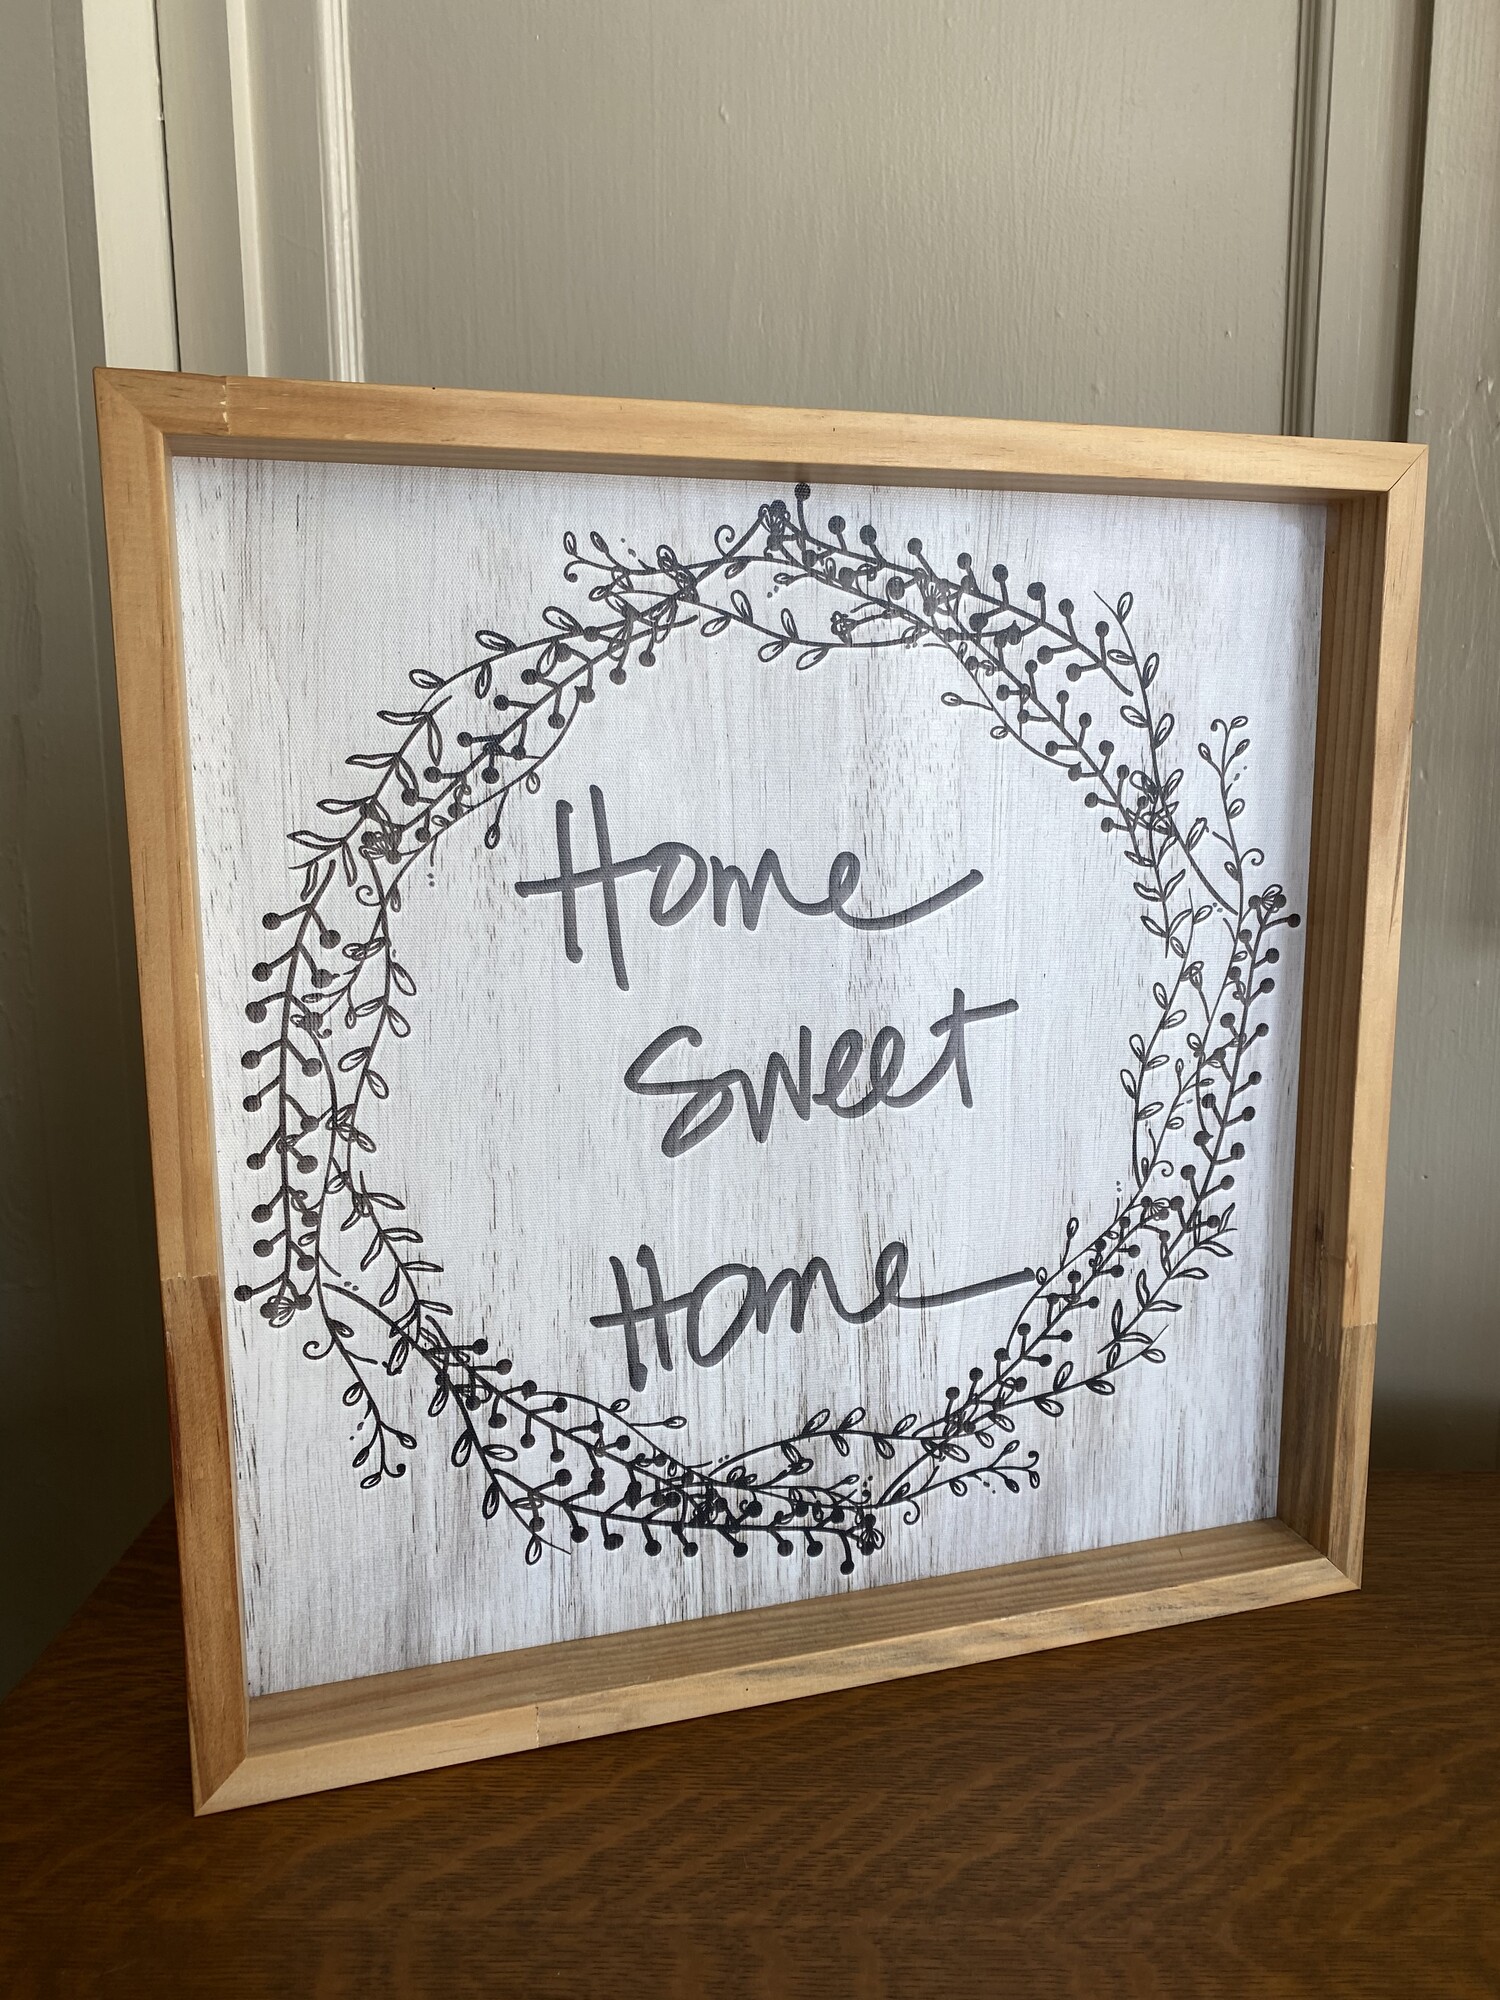 Home Sweet Home Sign
15 in x 15in